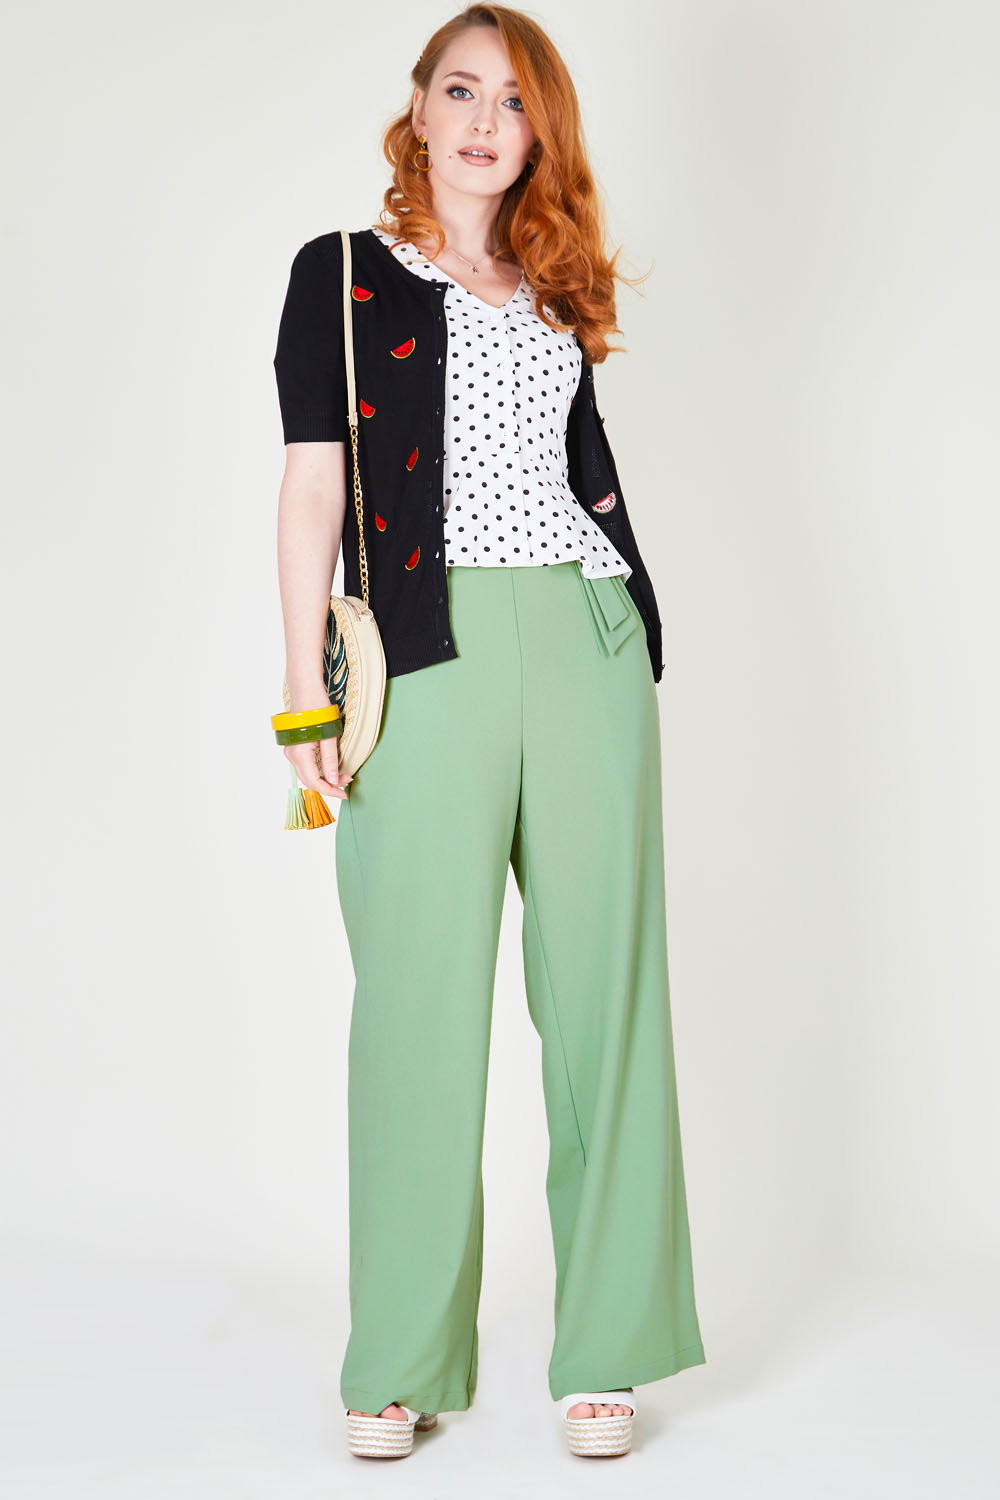 Sadie Pastel Green Trousers | Vintage Inspired Fashion & Accessories ...